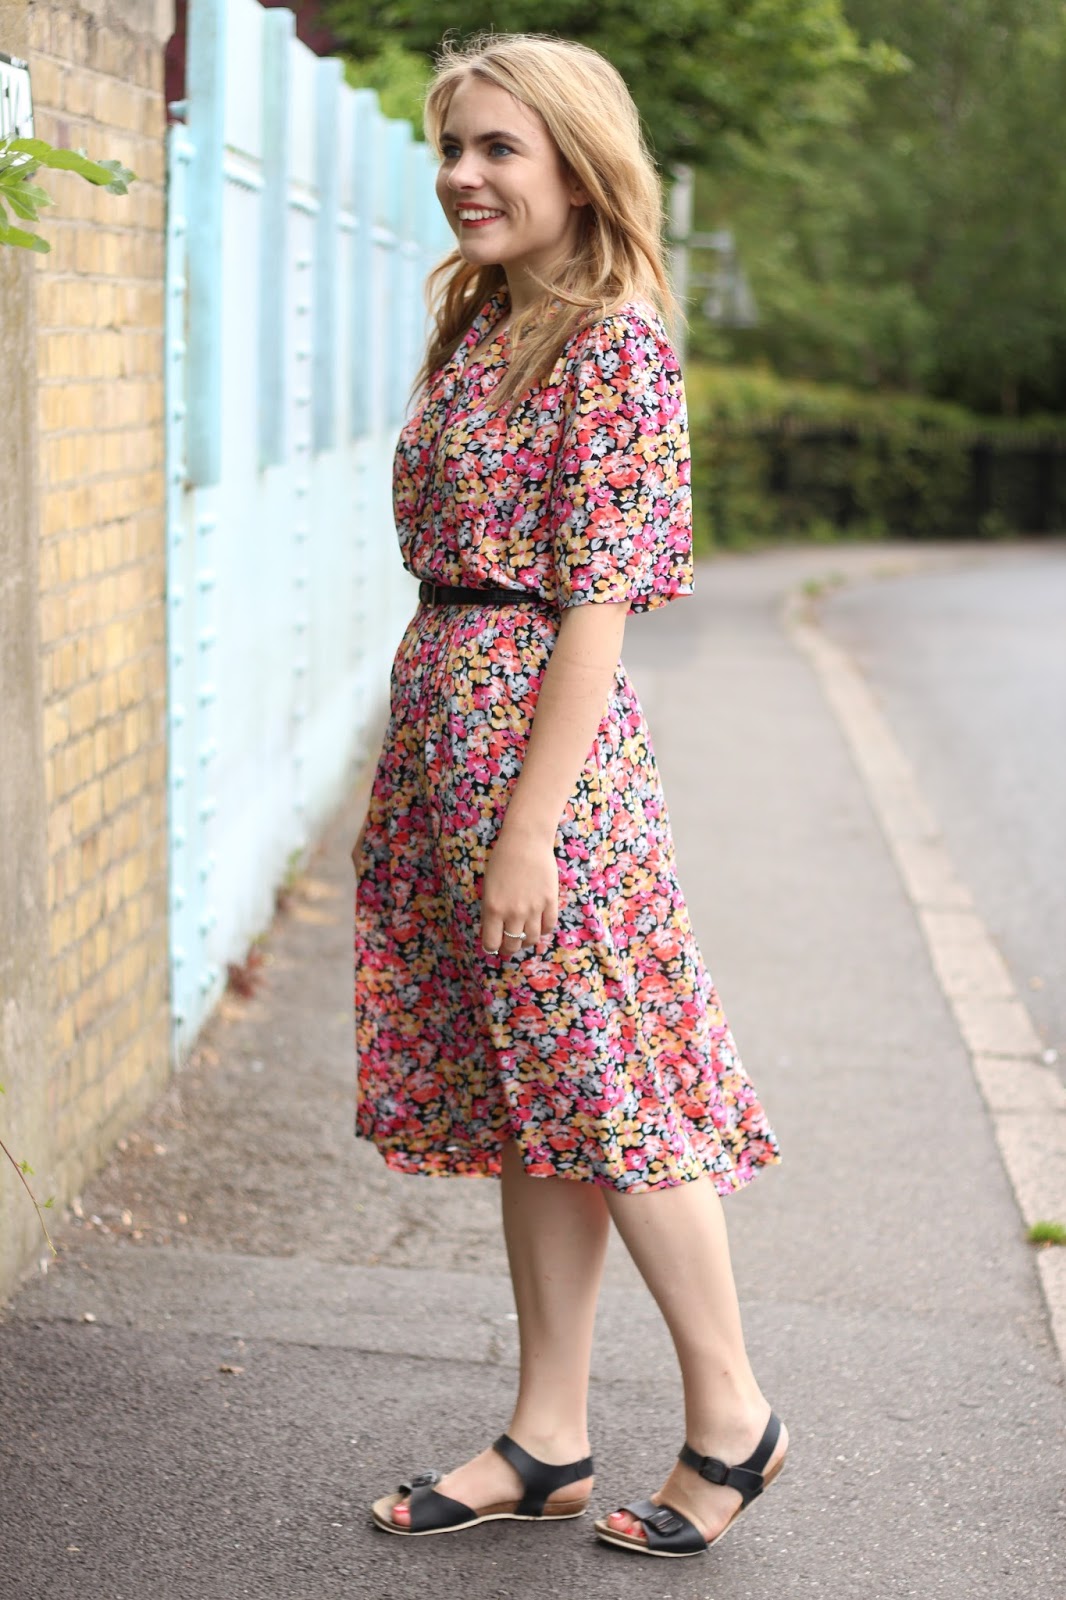 Paloma in Disguise: A Charity Shop Dress For The Sunshine